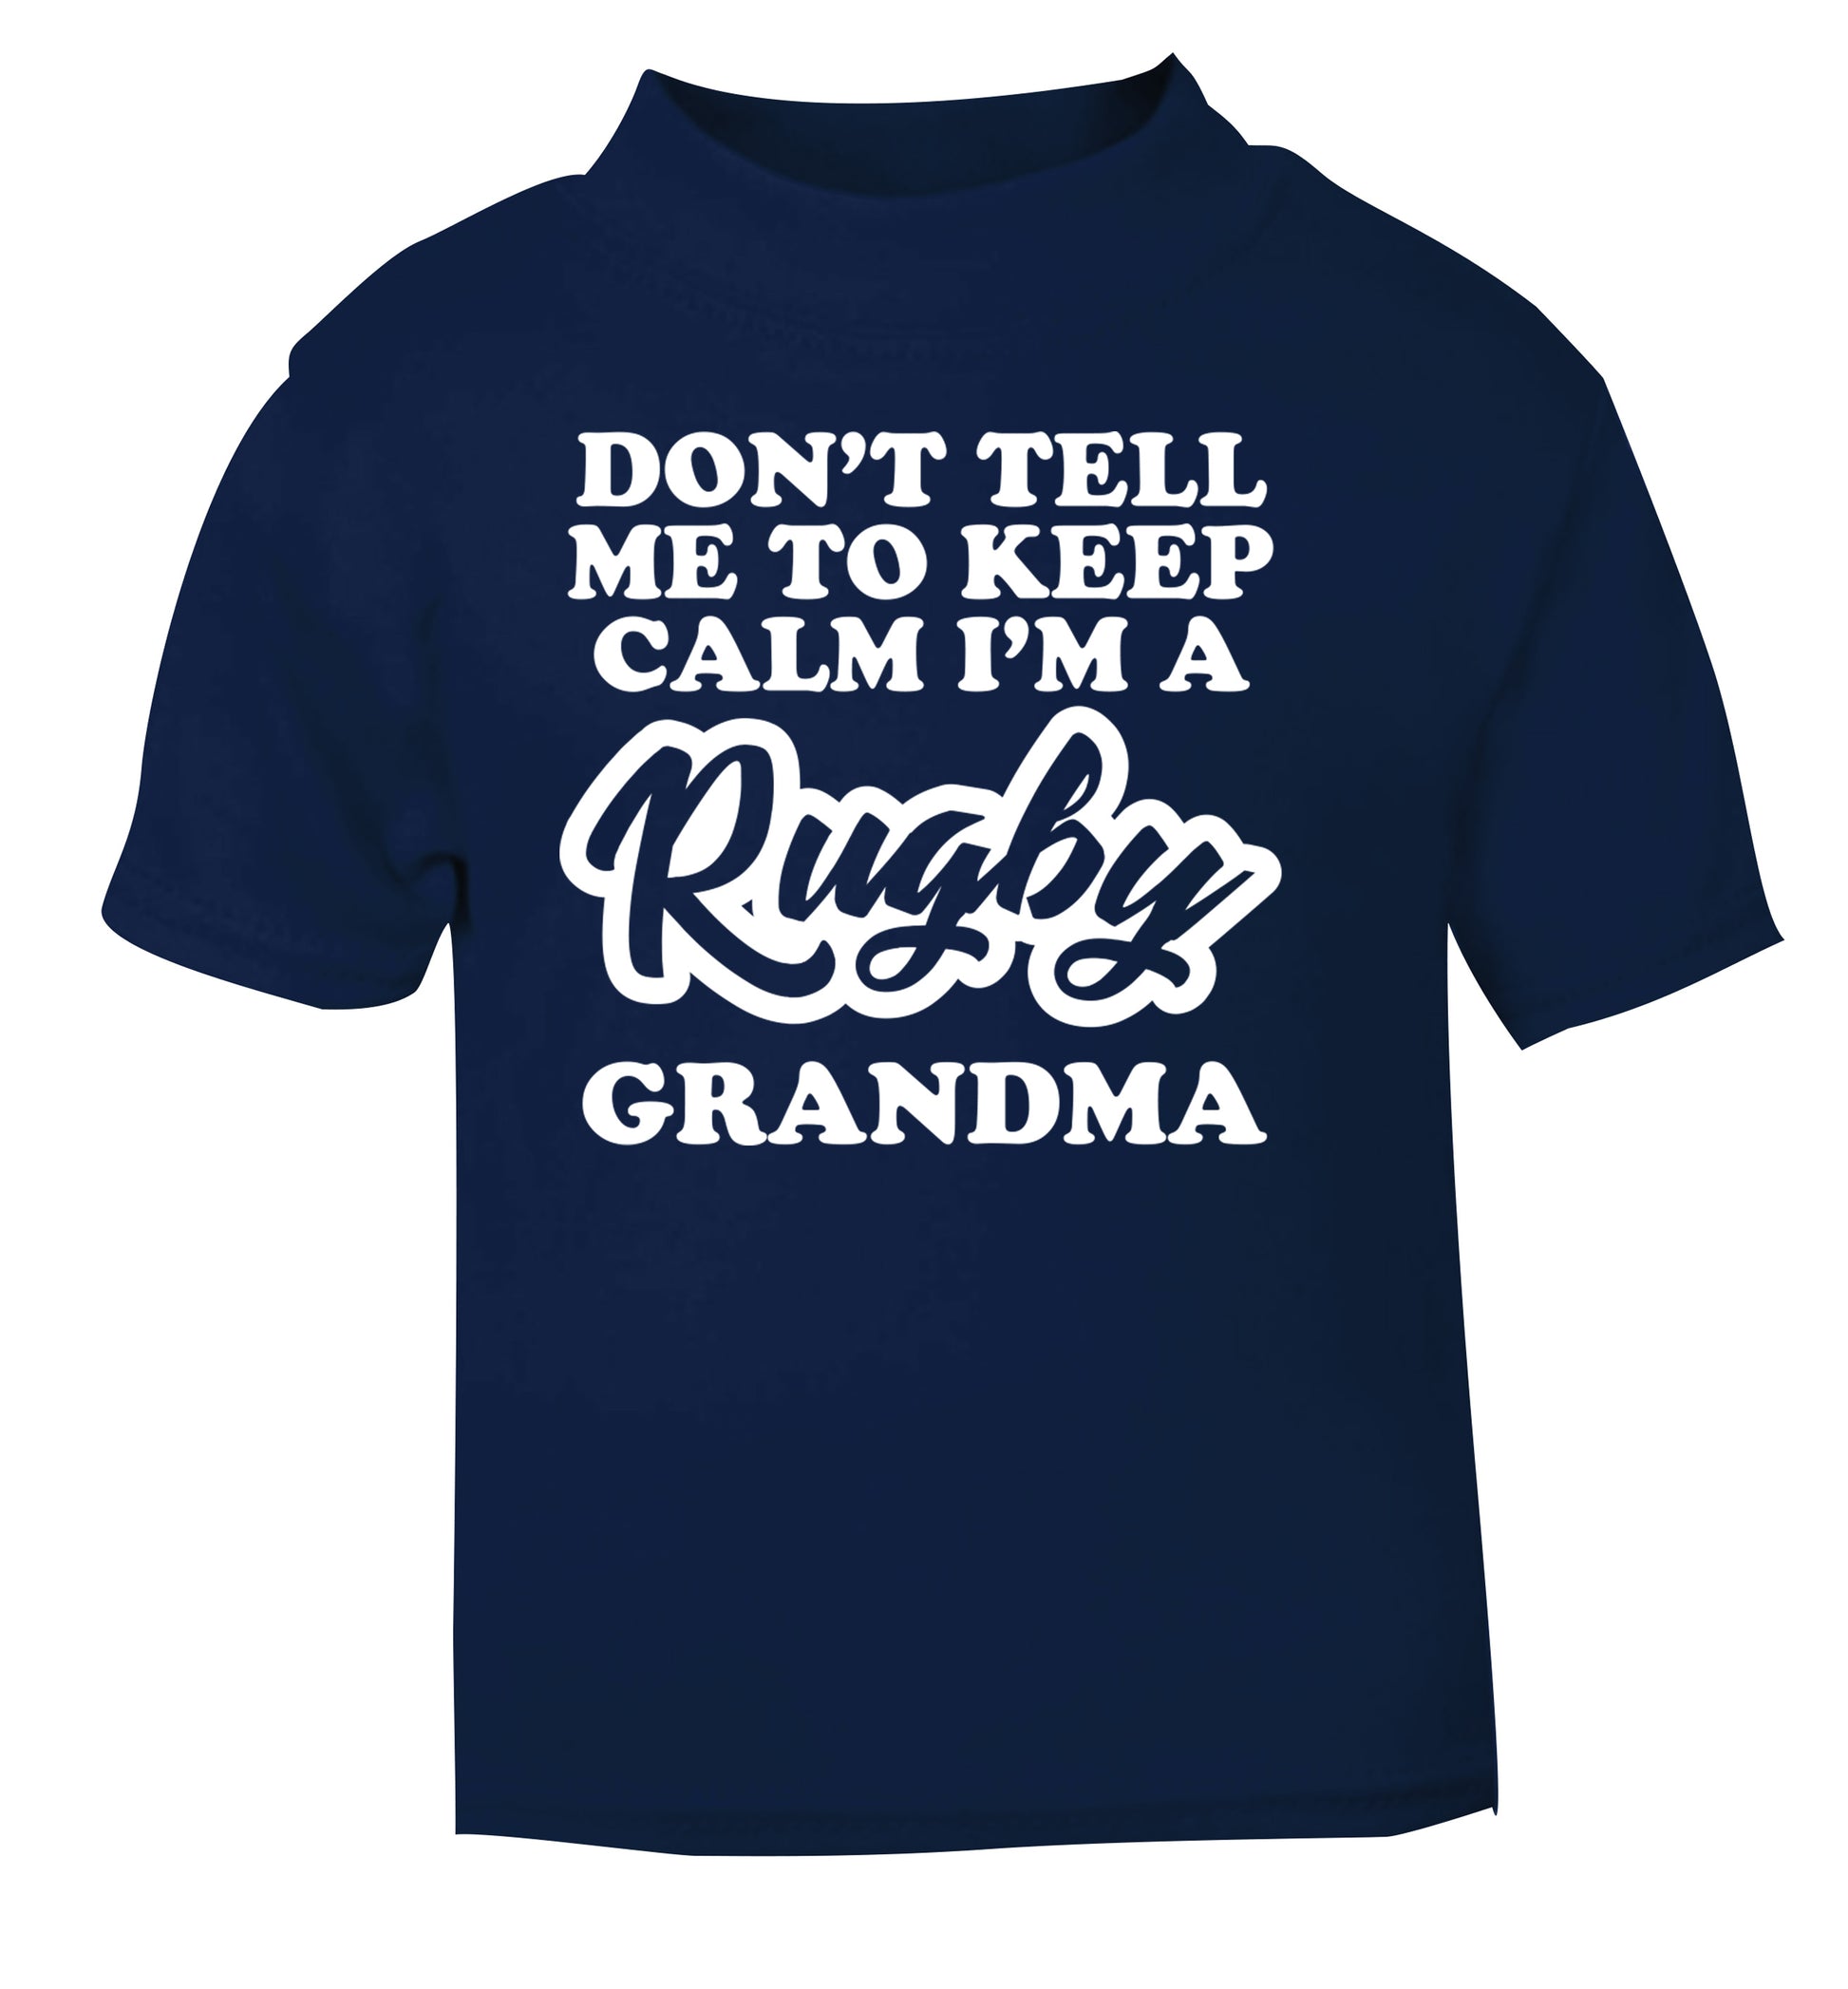 Don't tell me to keep calm I'm a rugby grandma navy Baby Toddler Tshirt 2 Years